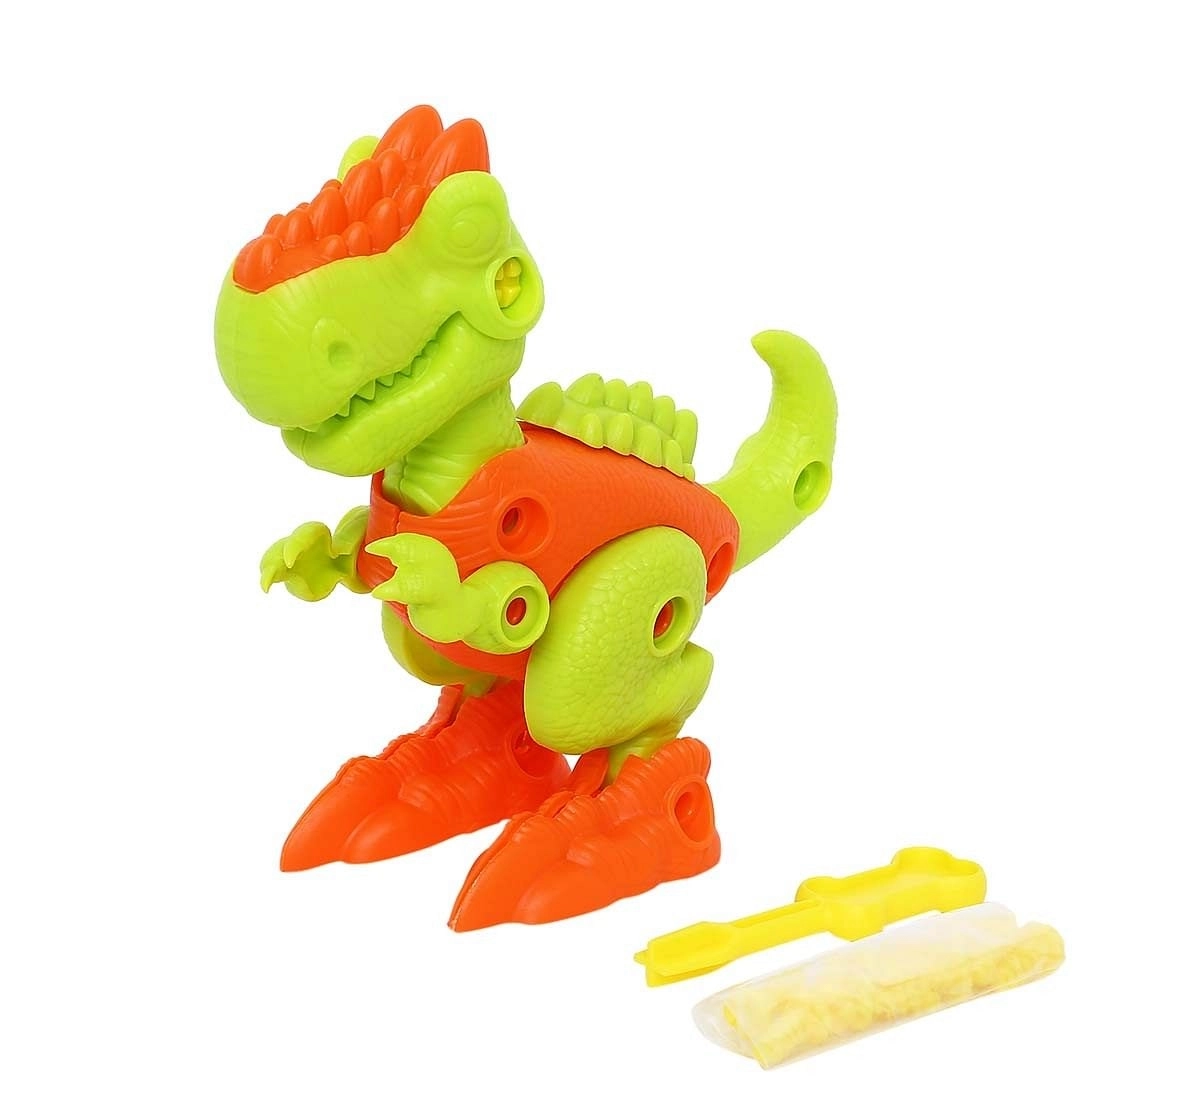 Dragon I Build T-Rex and Play, 29 Pcs Activity Toys for Kids age 3Y+ 